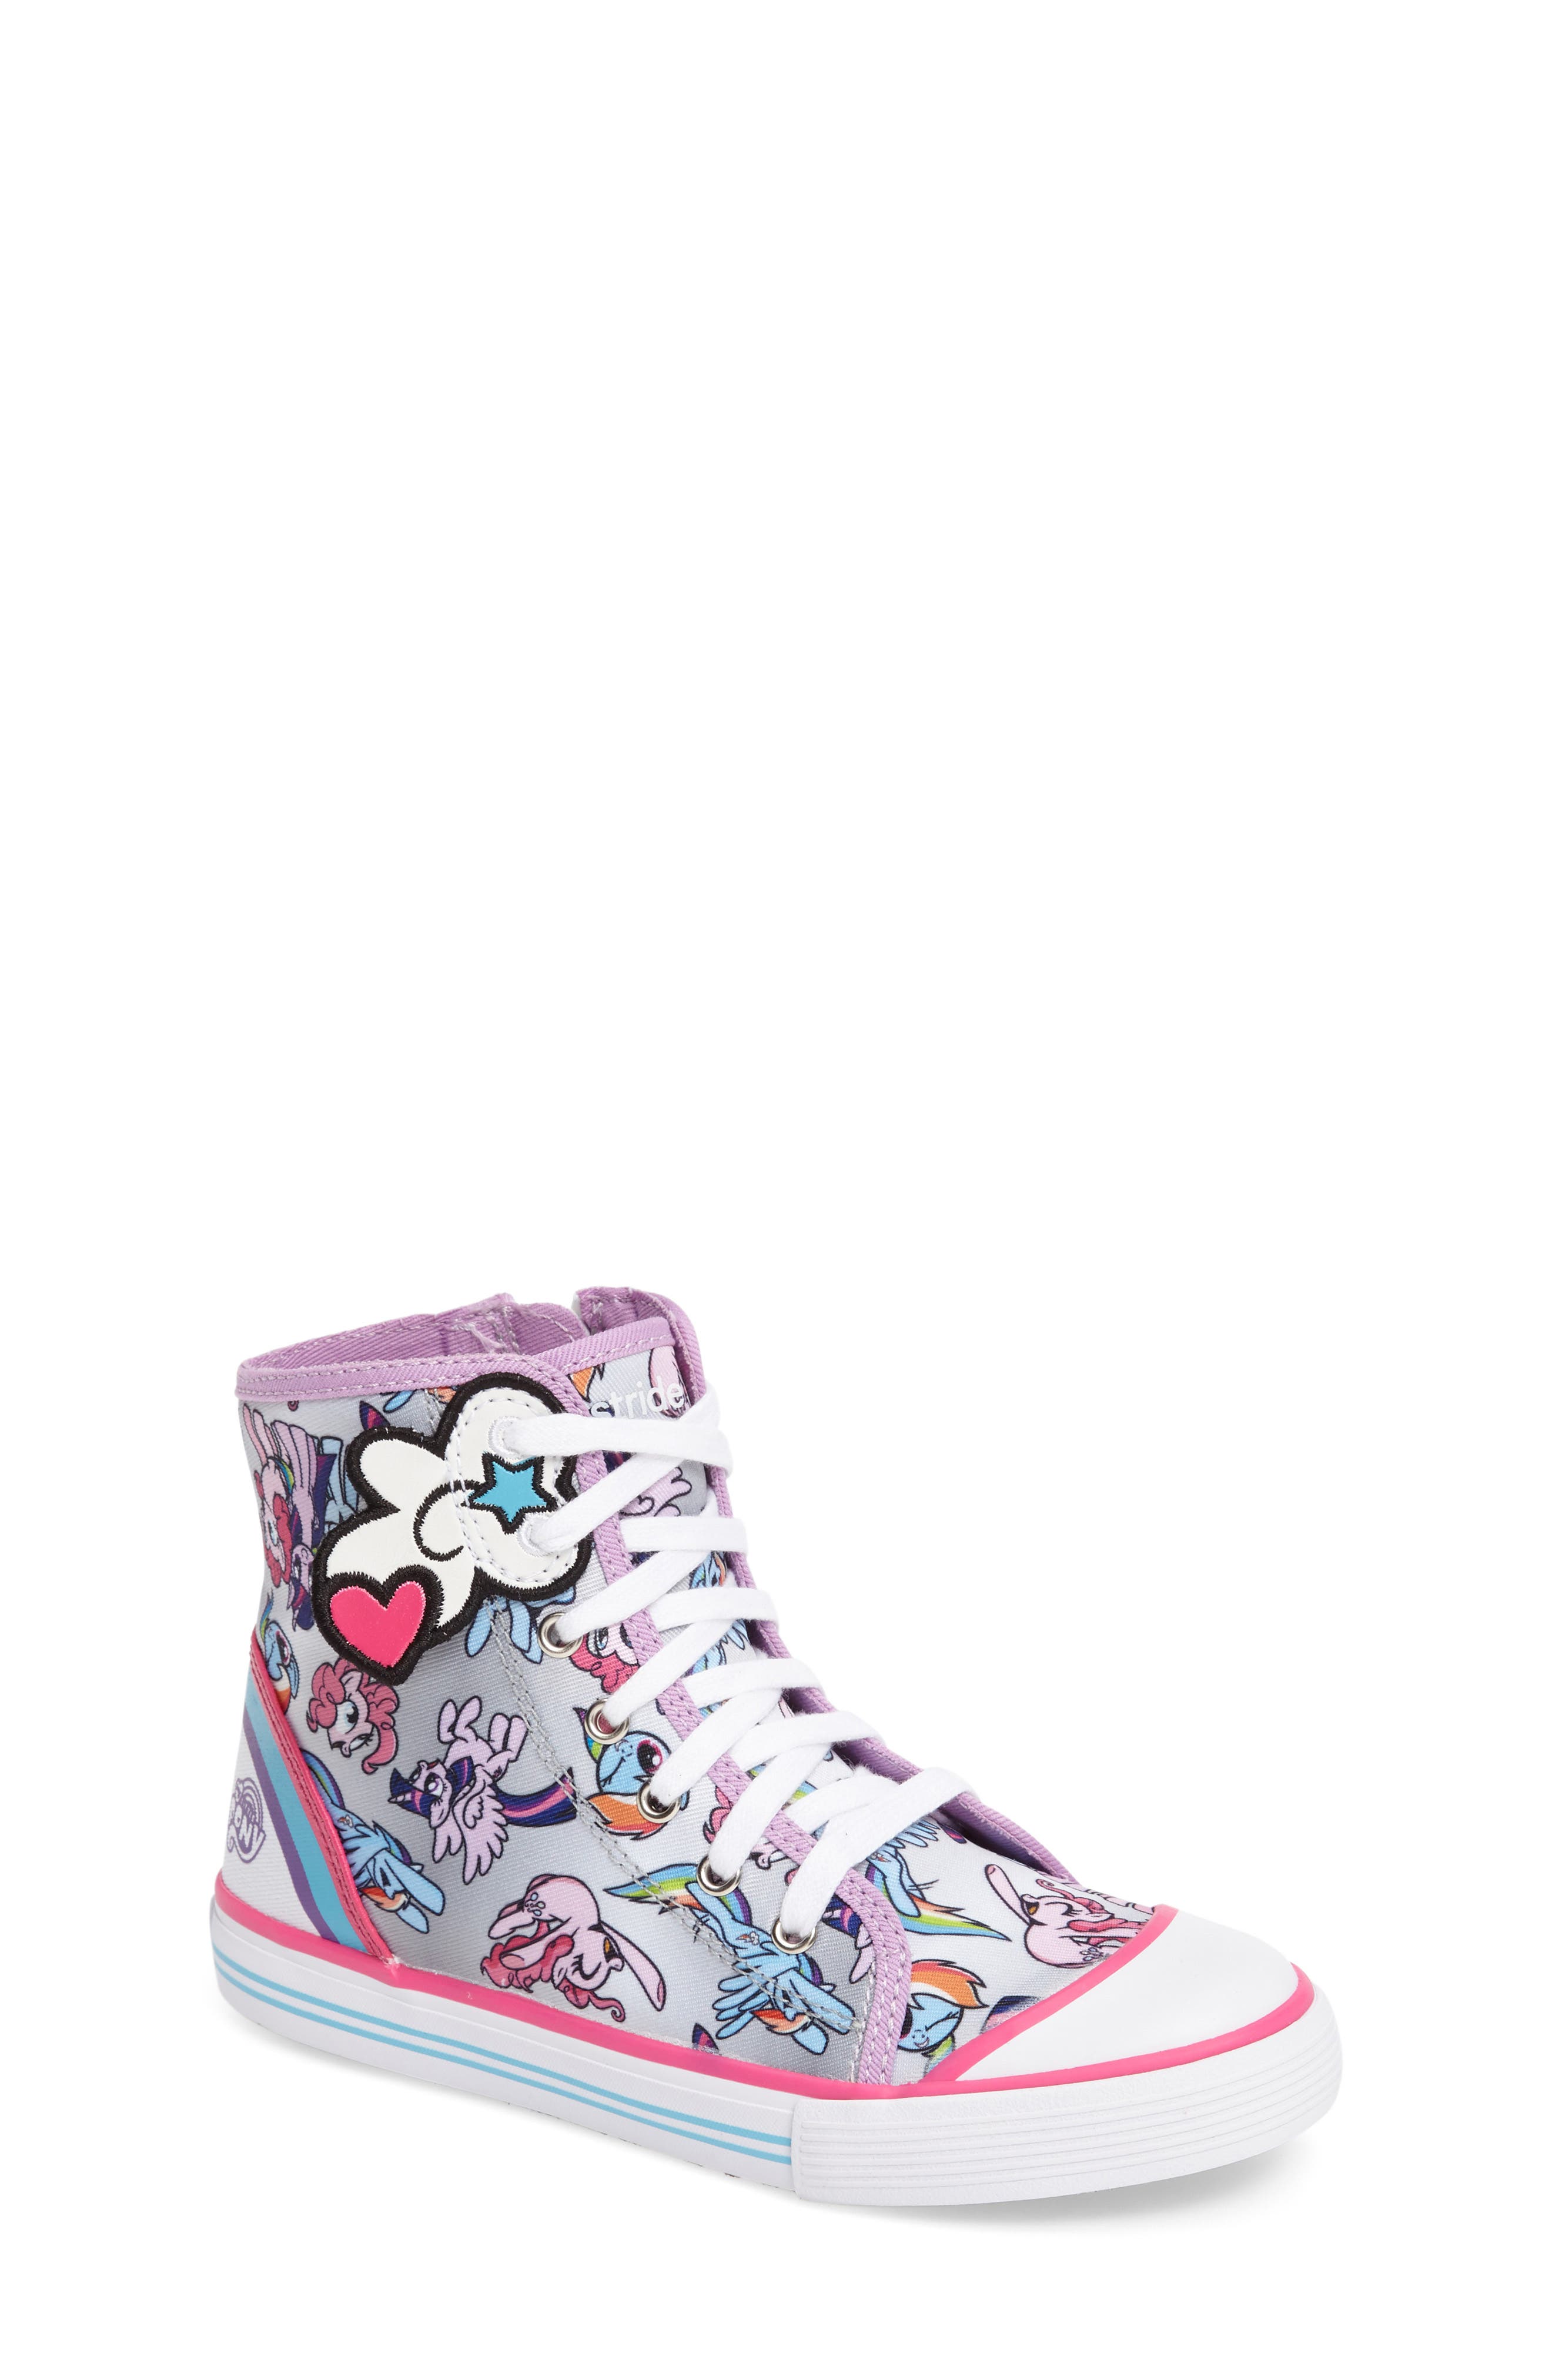 pony high top shoes